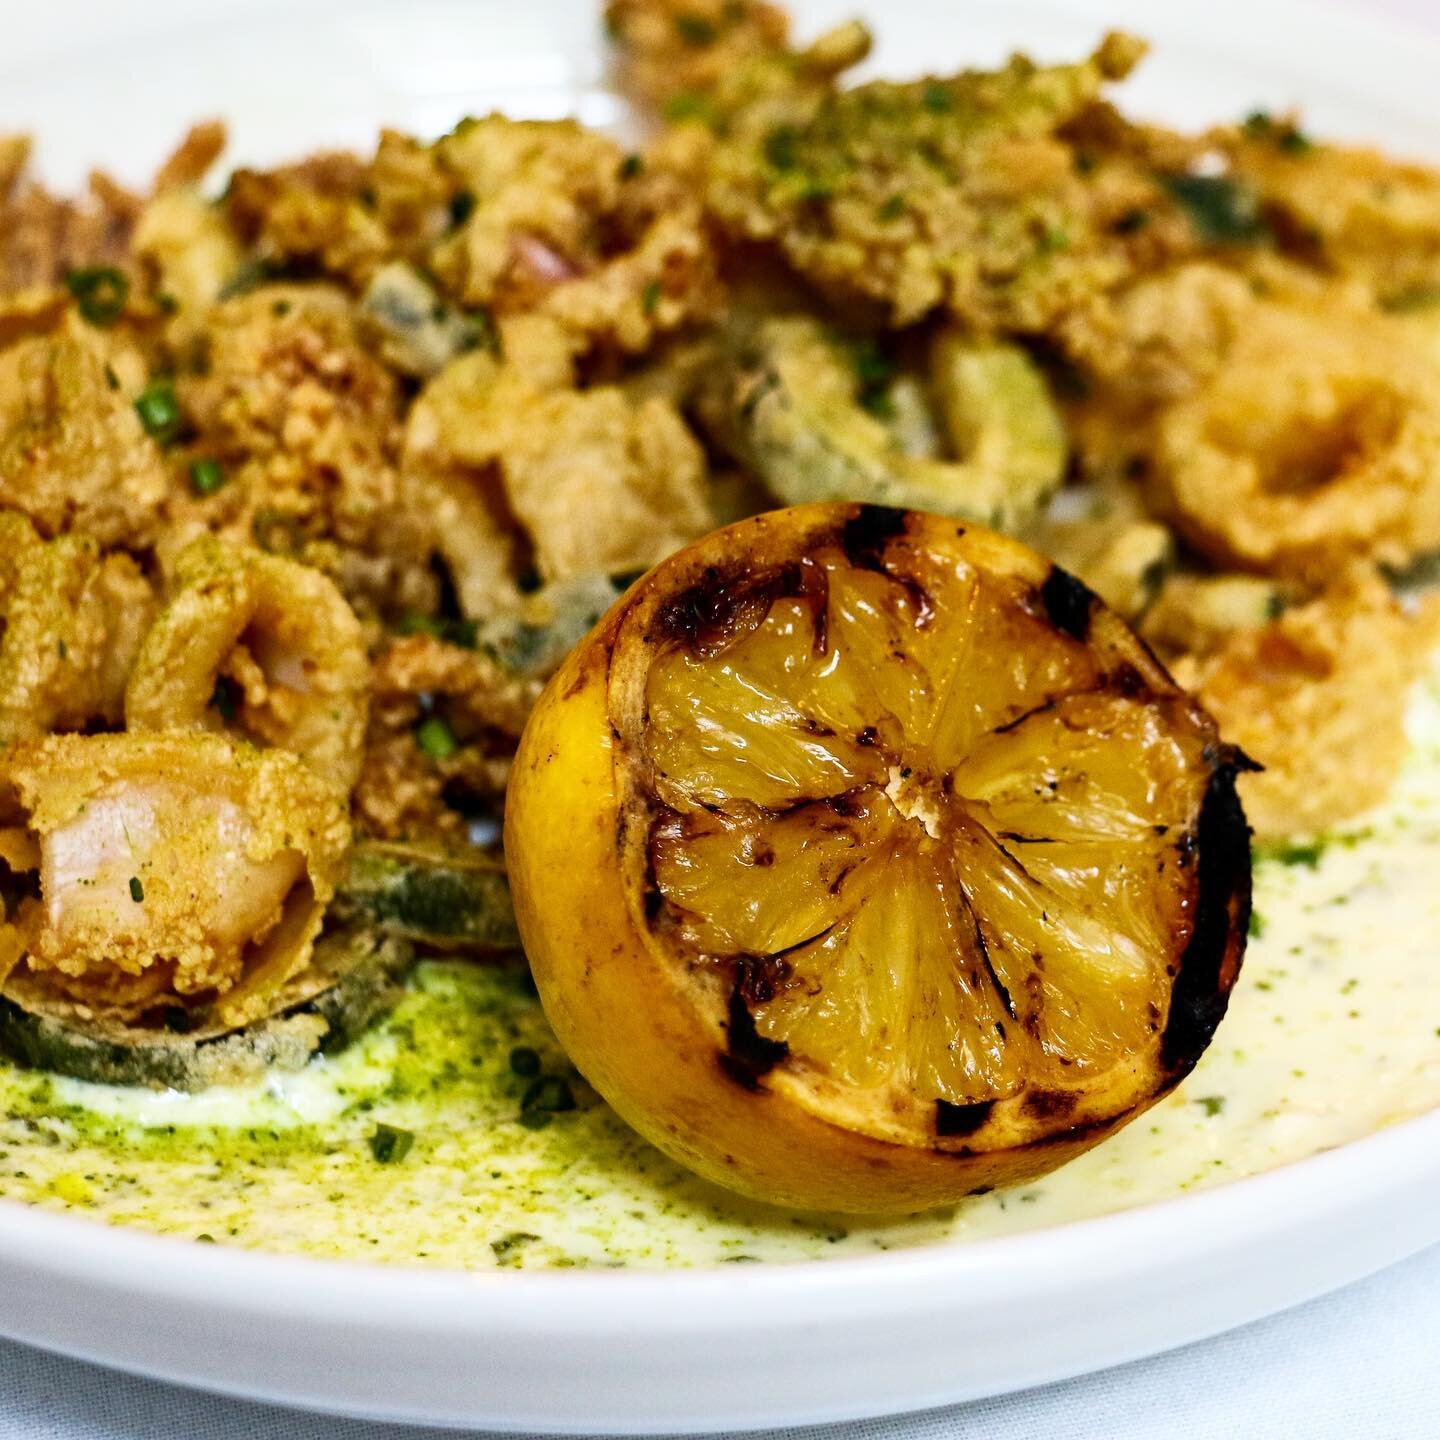 You can&rsquo;t go wrong with calamari 🦑 

We elevate this crowd-pleaser with jalape&ntilde;os, zucchini, and banana pepper remoulade. 

#bostonfoodies #bostonfood #bostoneats #bostonreataurants #boston #backbay #seafood #bostonseafood #appetizers #